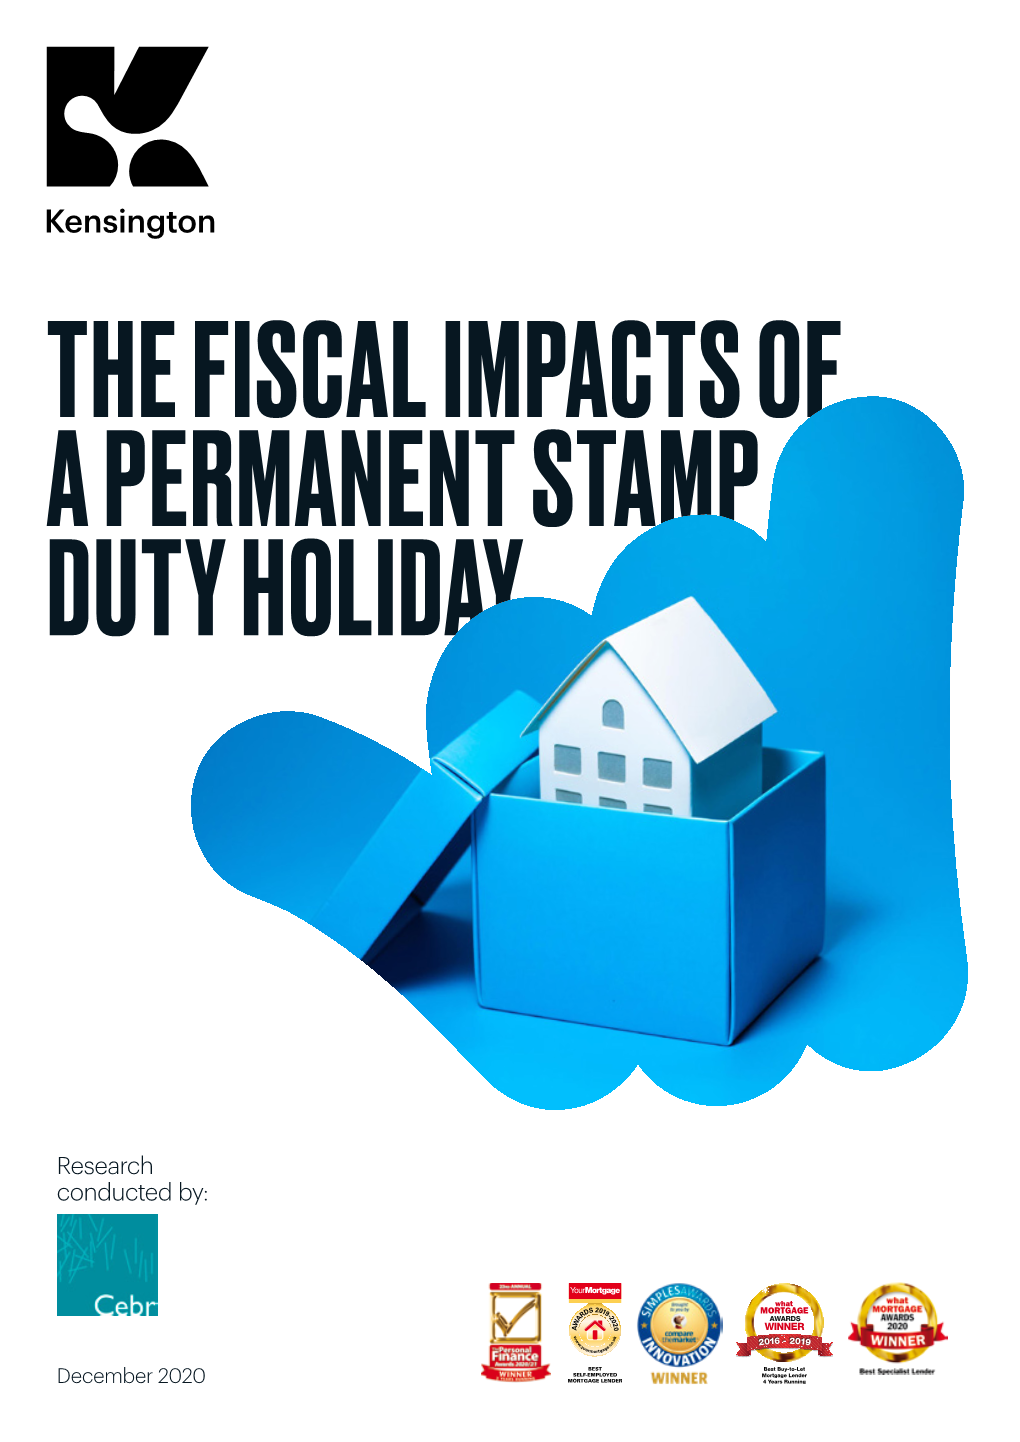 The Fiscal Impacts of a Permanent Stamp Duty Holiday